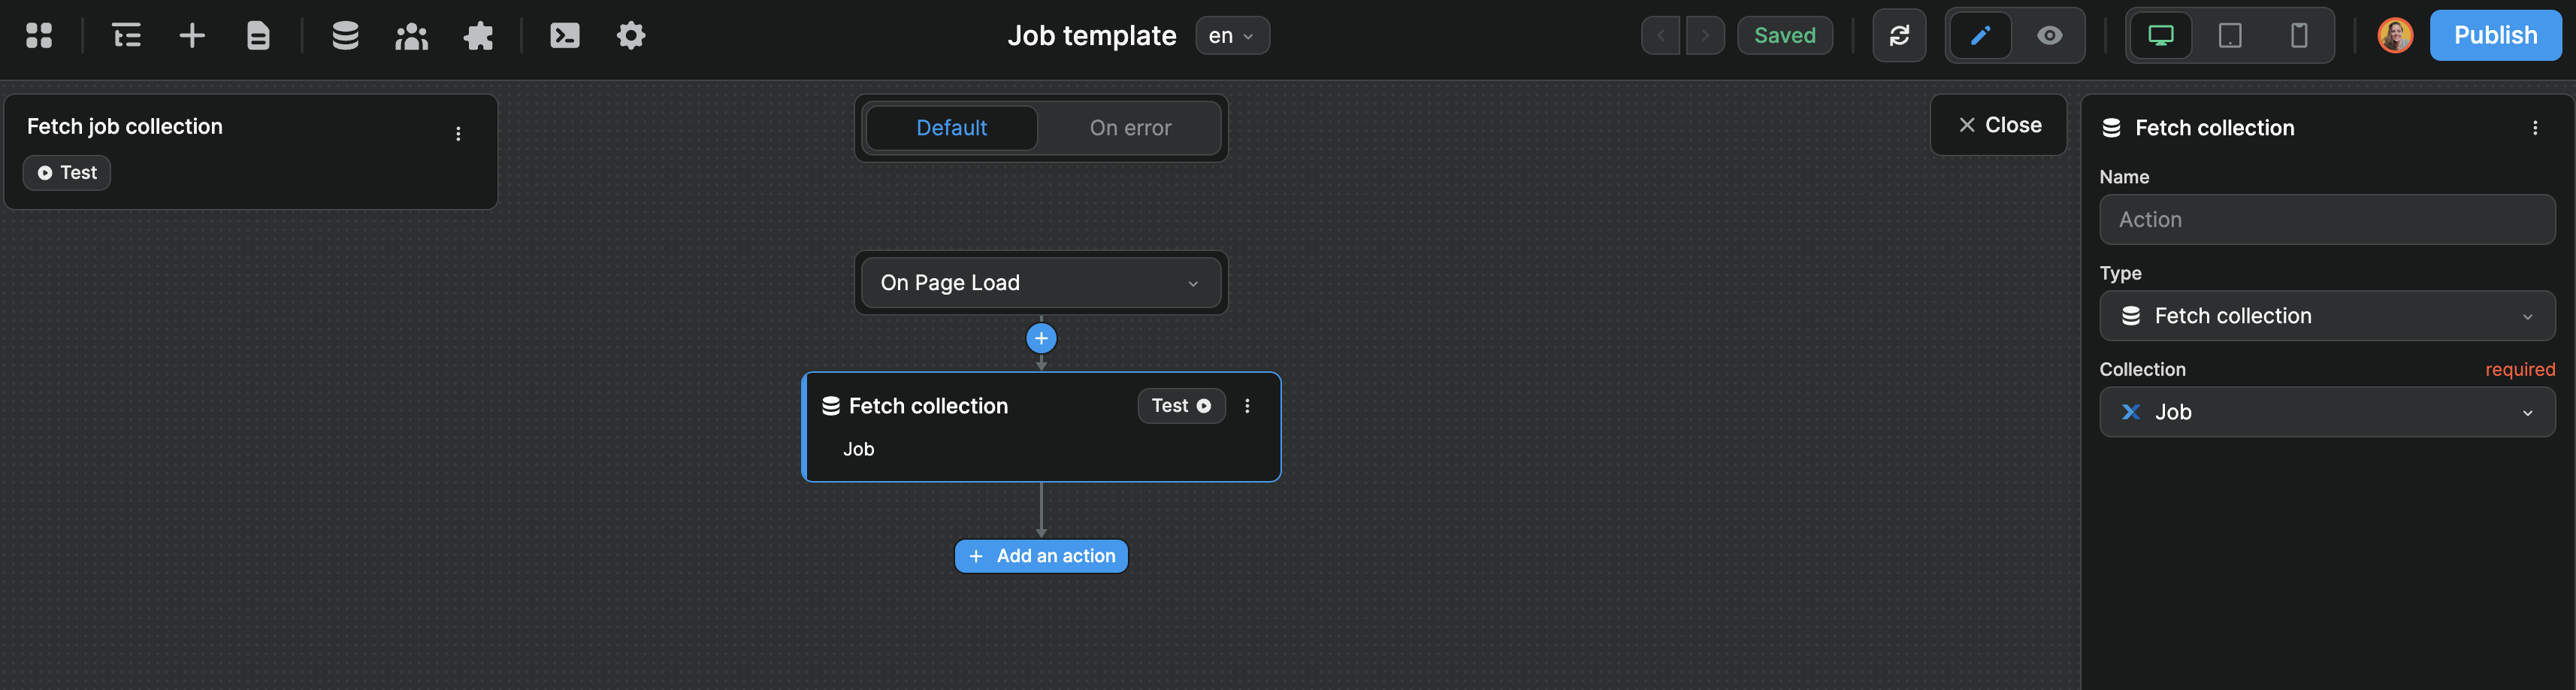 Fetch job collection in workflow